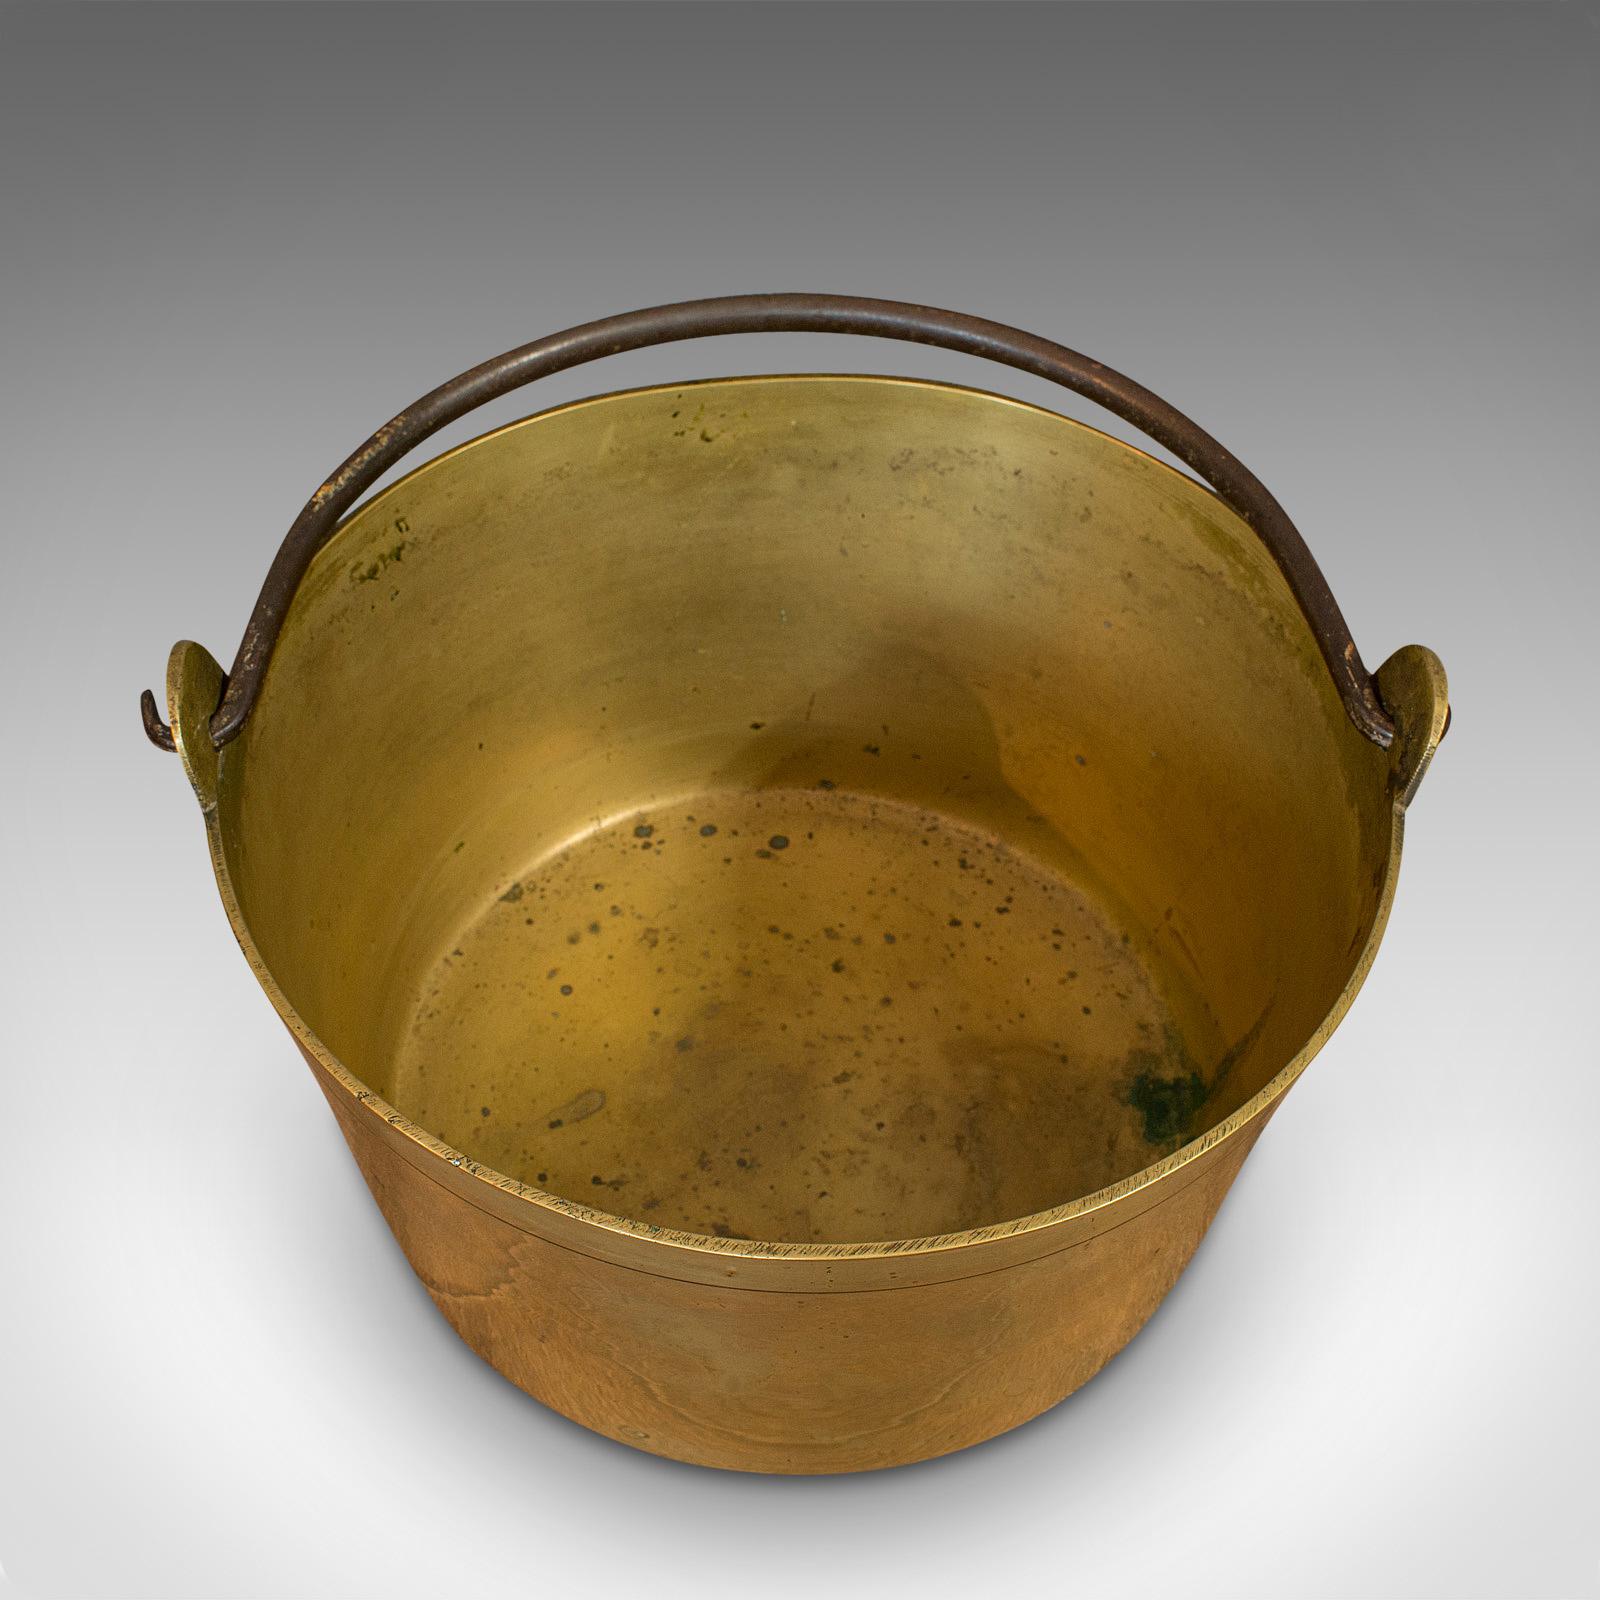 Antique Jam Pan, French, Solid Brass, Artisan Kitchen Pot, Victorian, circa 1900 For Sale 1